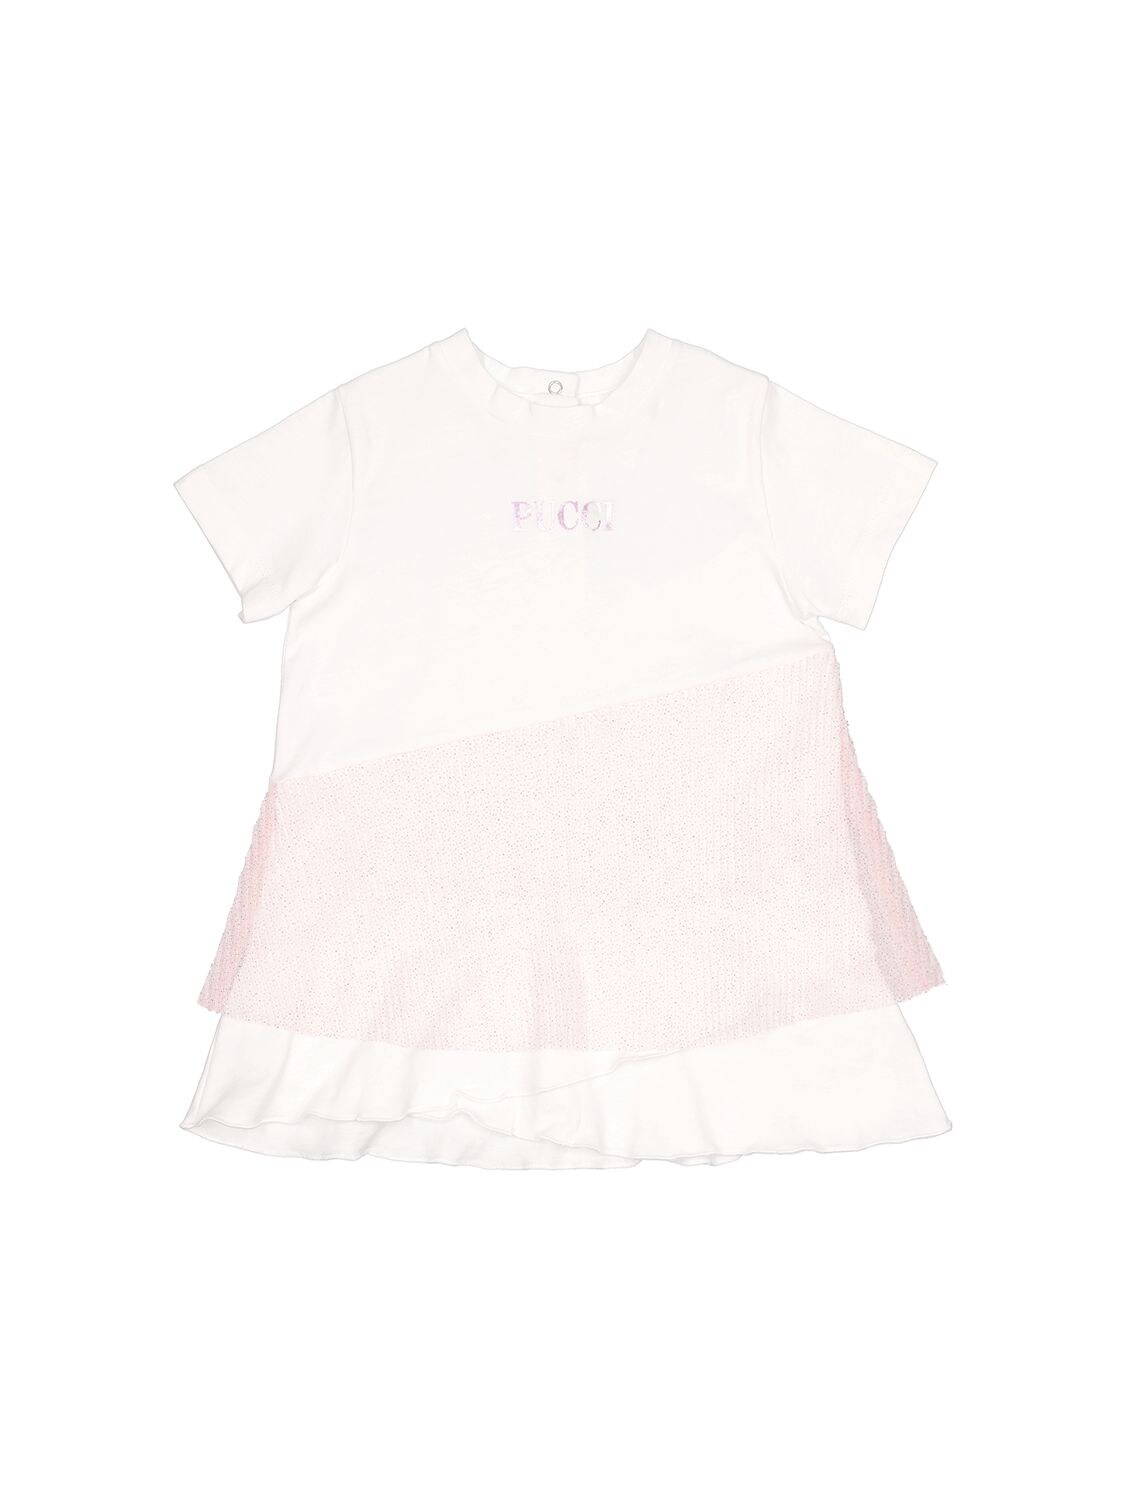 Emilio Pucci Babies' Cotton Jersey Dress W/ Tulle Insert In White,pink